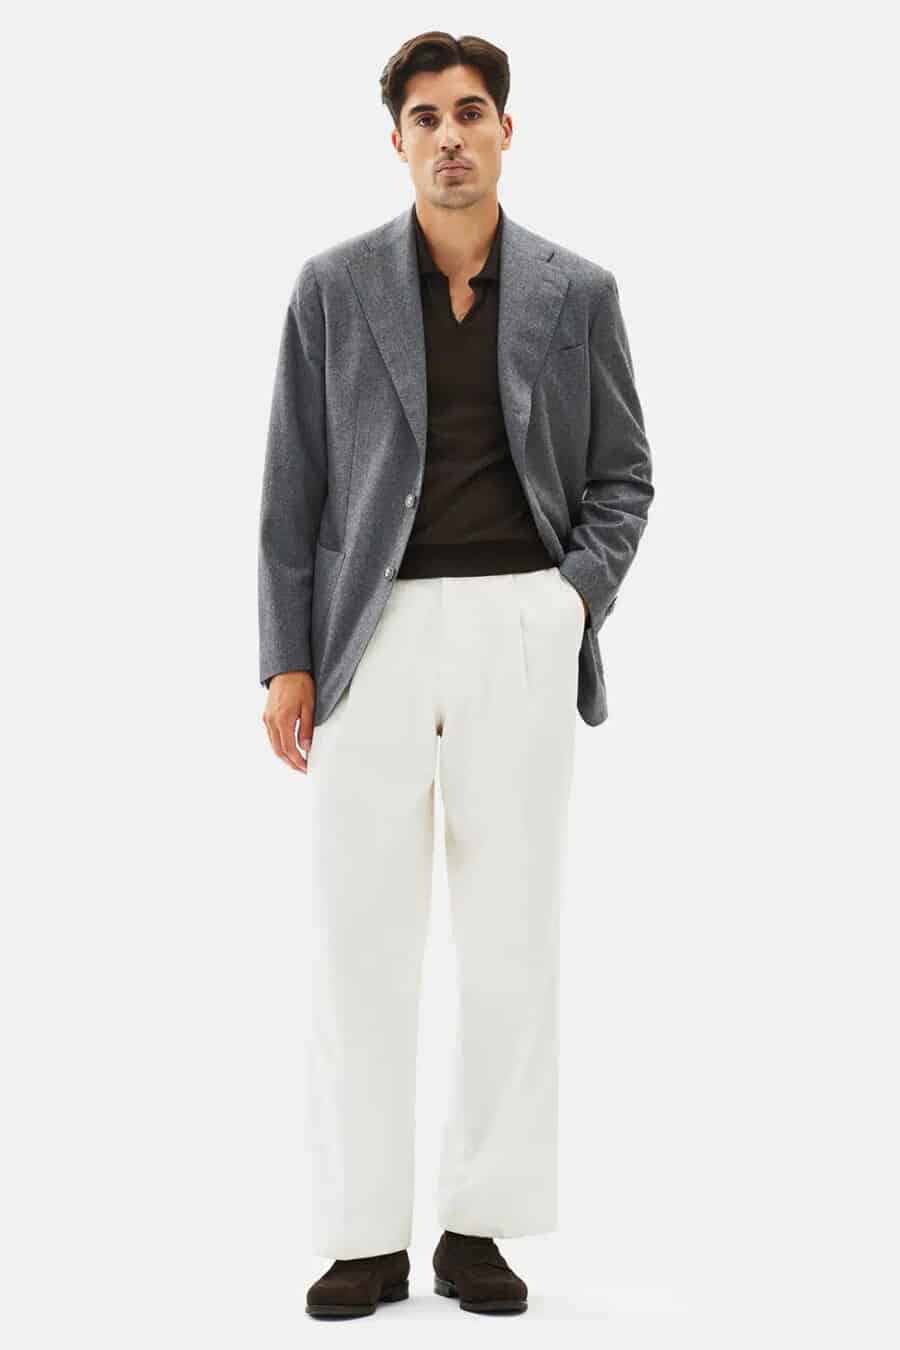 Men's loose white pants, black open collar polo shirts, charcoal wide notch lapel blazer and brown suede loafers